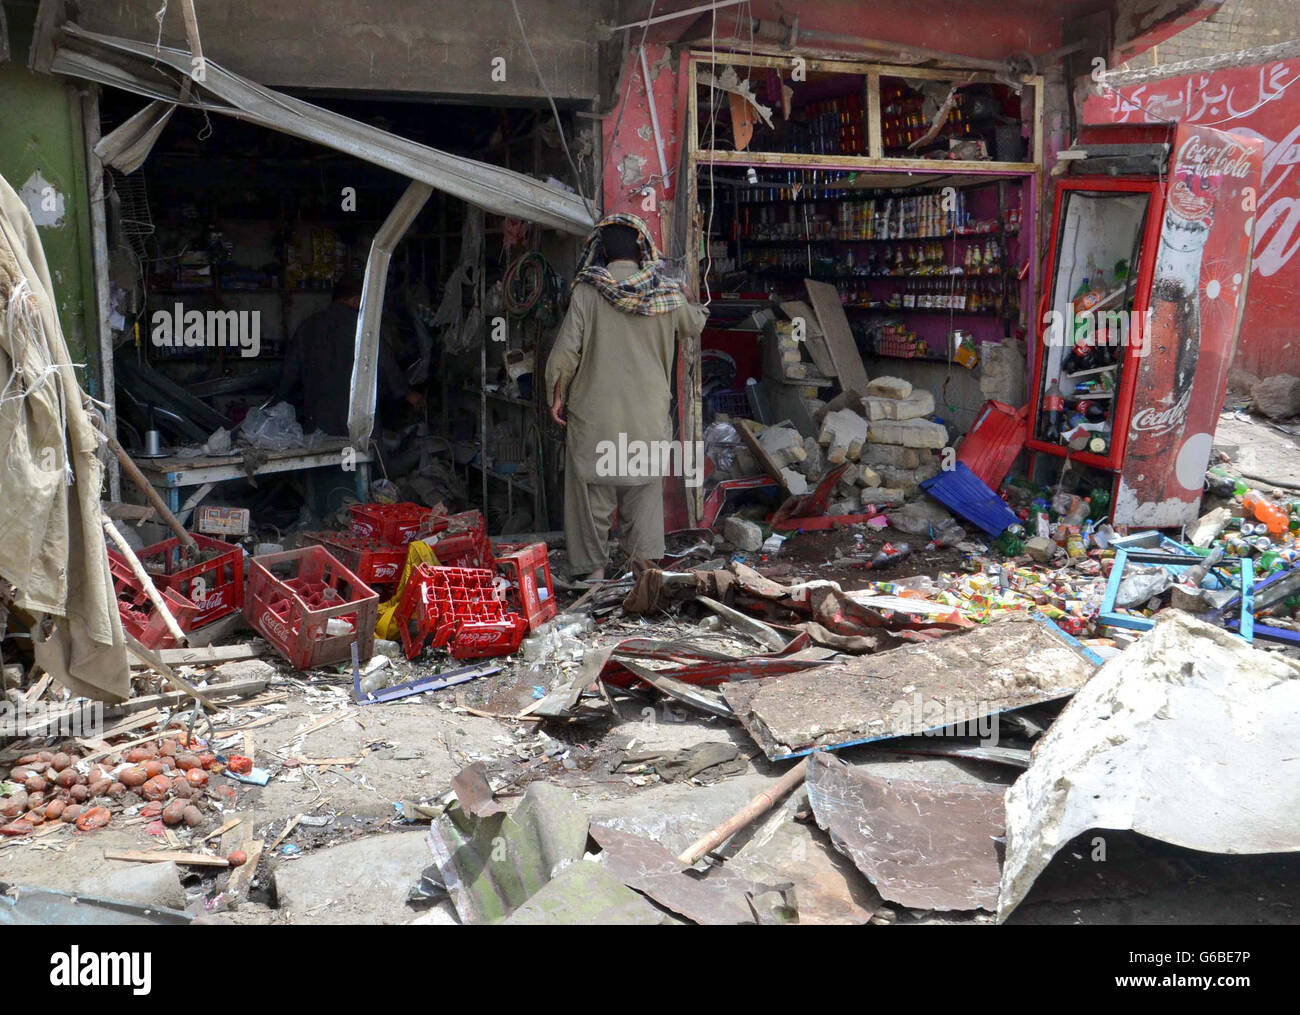 Views after bomb blast at Almo Chowk of Quetta on Friday, June 24, 2016. According to sources the remote-controlled blast occurred near a shop at Almo Chowk on Airport Road, spreading panic in the area. Security officials confirmed the deaths in the incident, saying the explosives weighing eight to 10 kilogram were installed on a motorcycle parked outside a nearby shop. Stock Photo